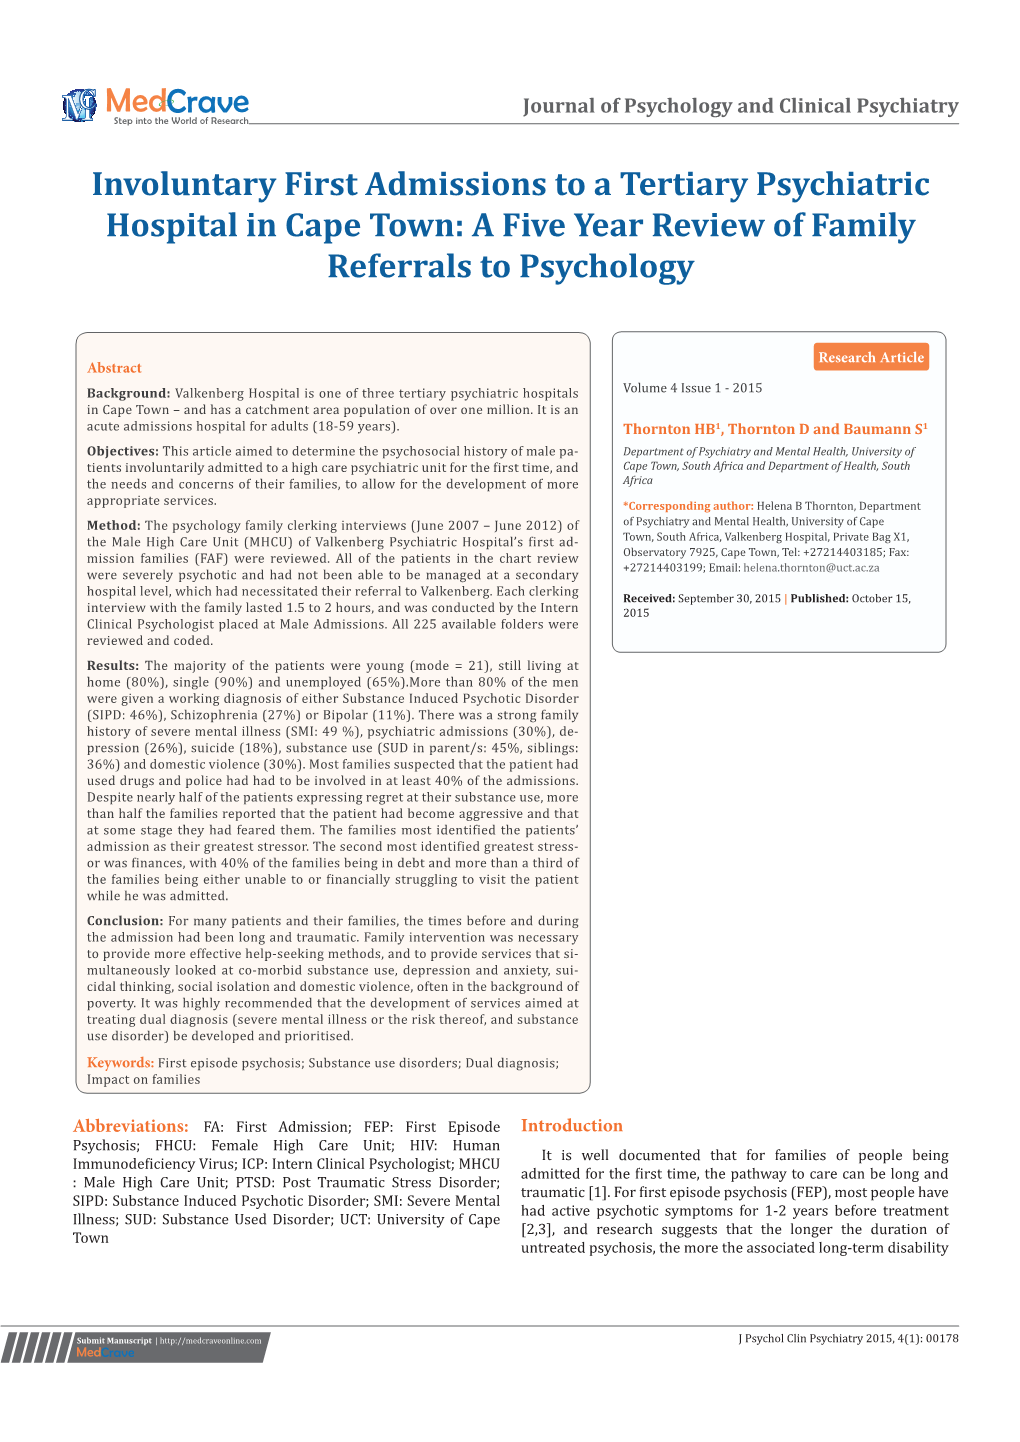 Involuntary First Admissions to a Tertiary Psychiatric Hospital in Cape Town: a Five Year Review of Family Referrals to Psychology